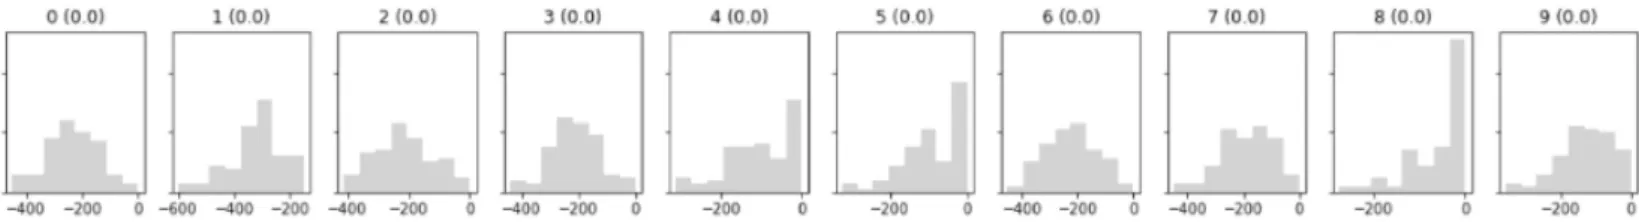 Figure 11: Skipped correct prediction of digit 8 due to too low probability.